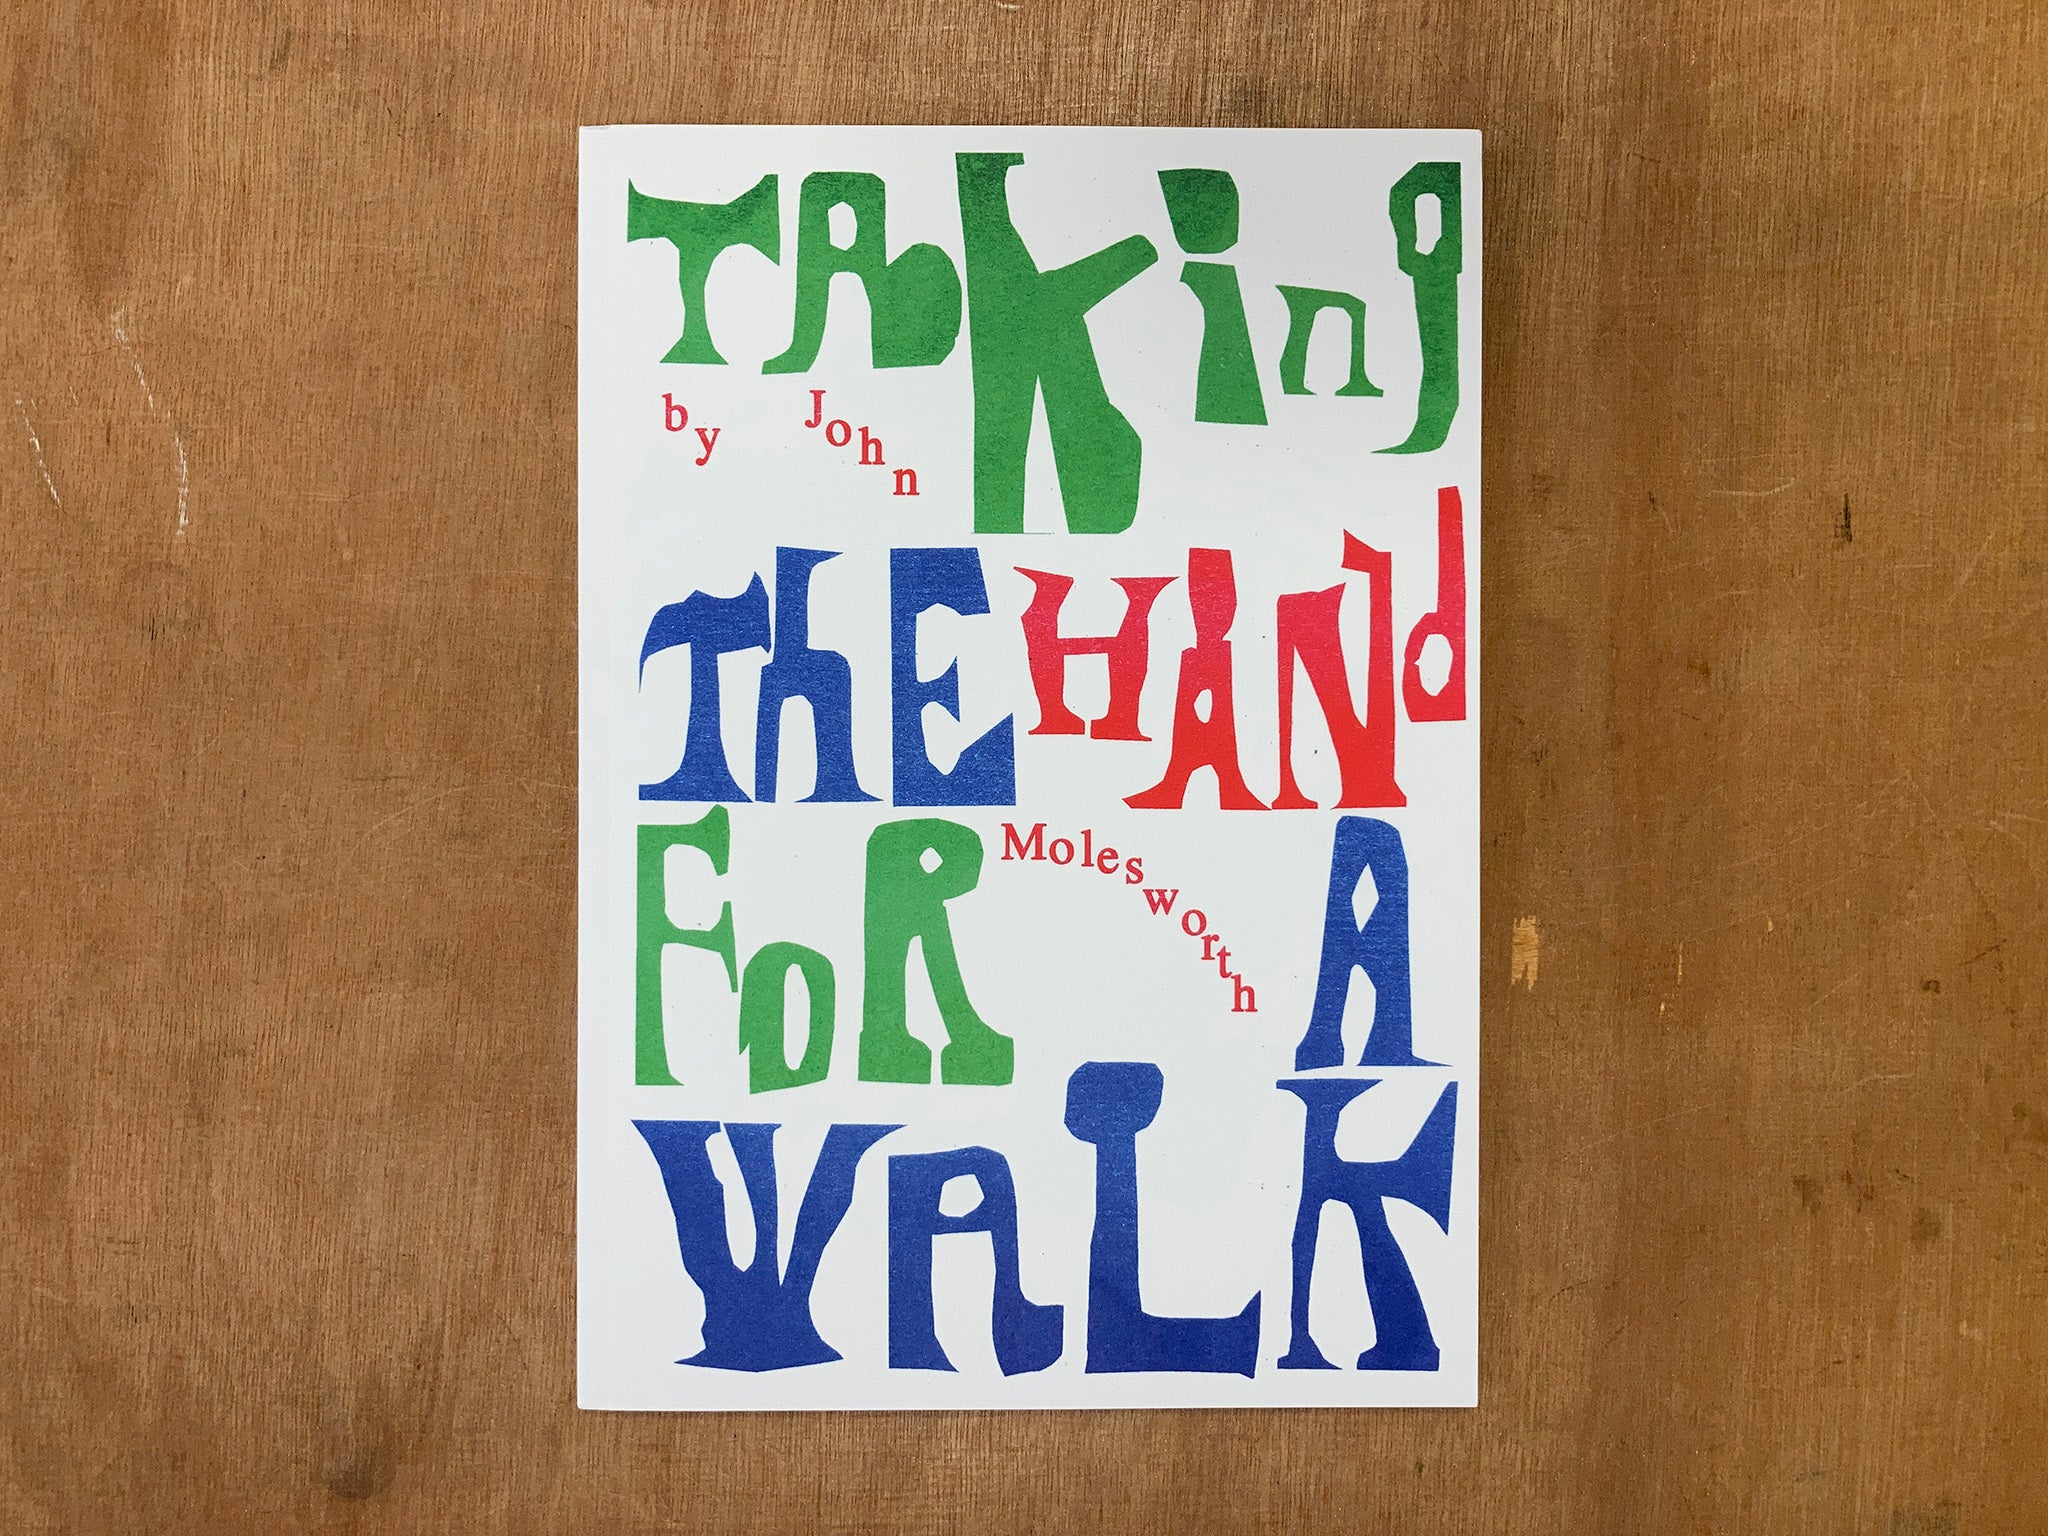 TAKING THE HAND FOR A WALK by John Molesworth